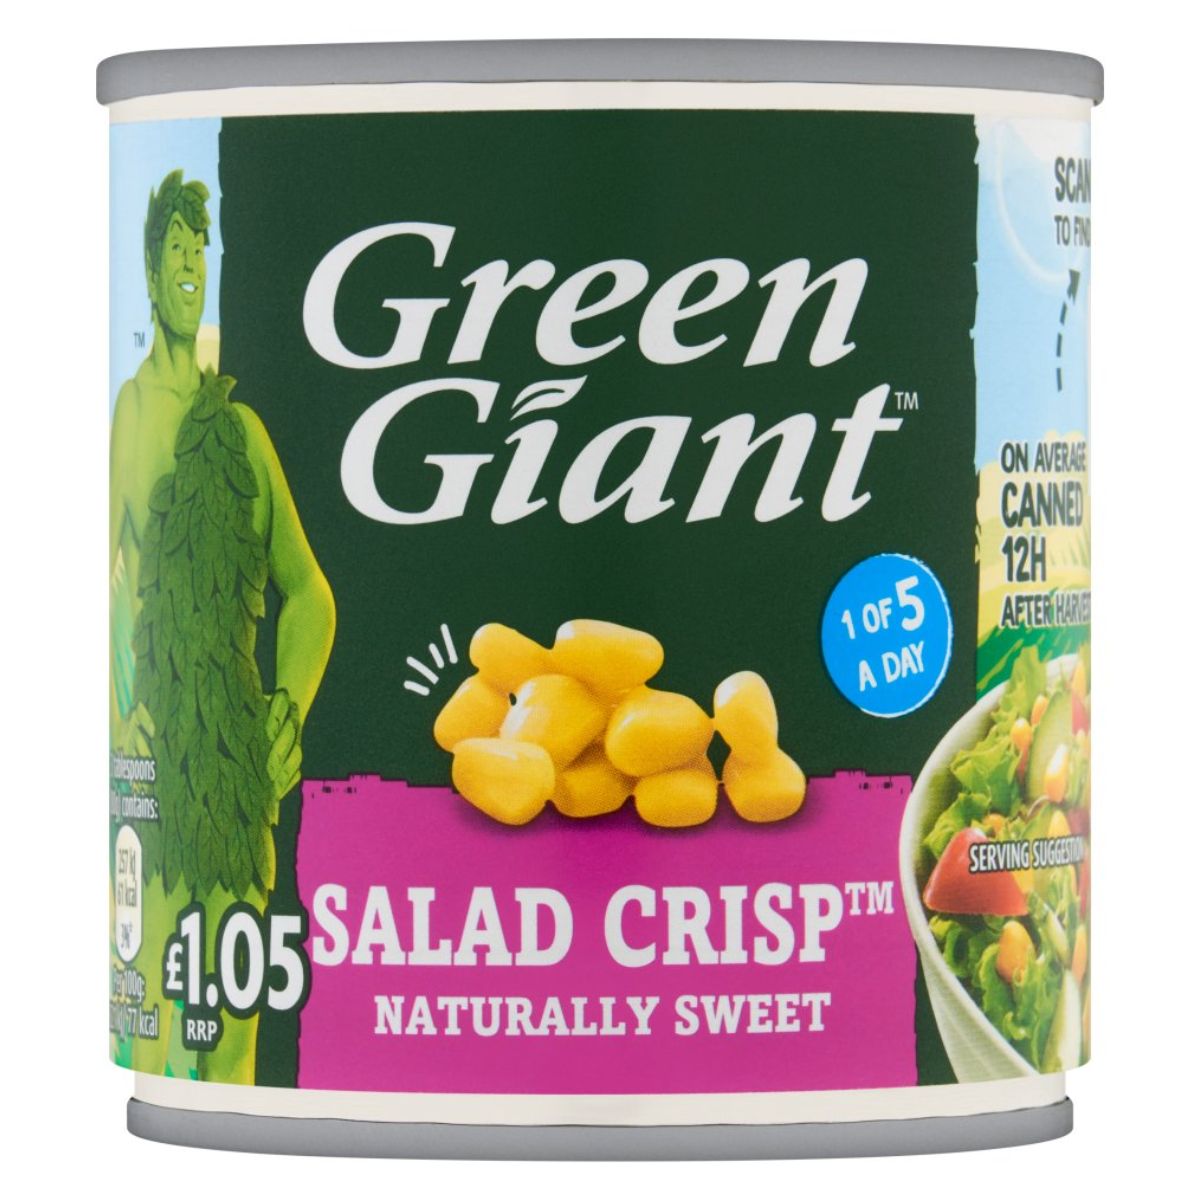 Can of Green Giant Salad Crisp Sweet Corn - 160g with a graphic of the Green Giant on the label, priced at £1.05.